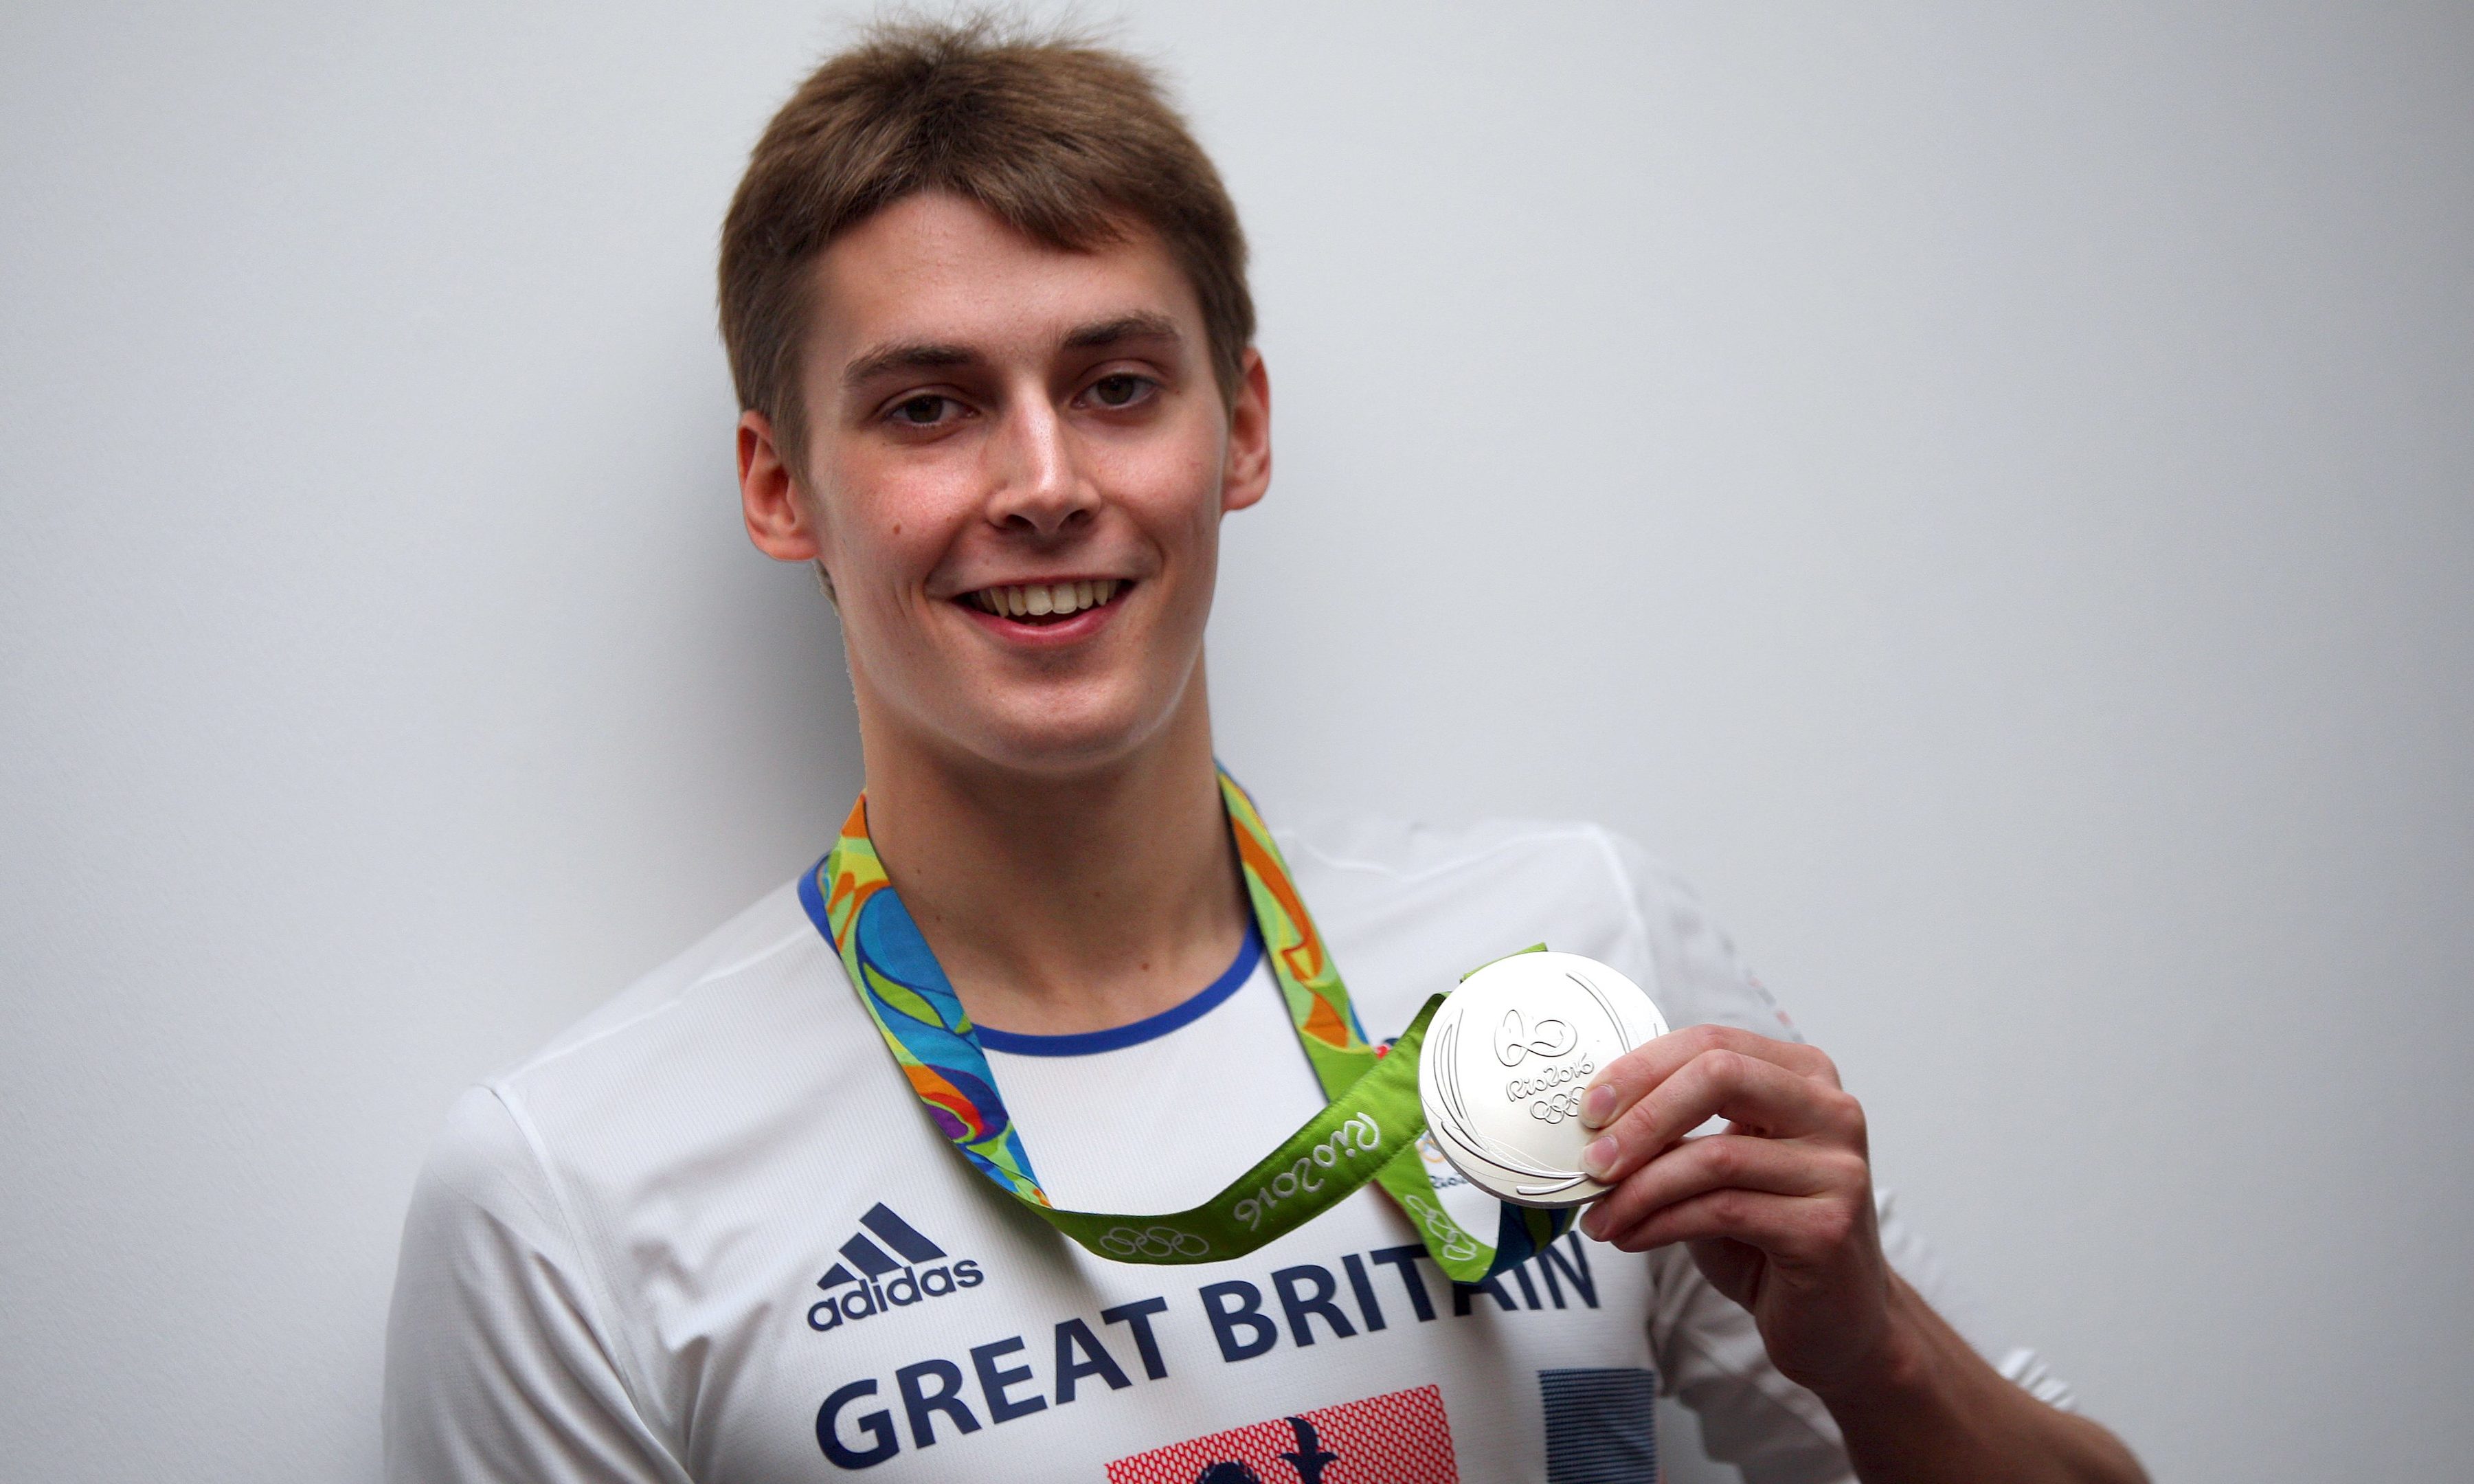 Olympic silver medal swimmer Stephen Milne, who trains at Dundee University, is one of those whose achievements will be celebrated.